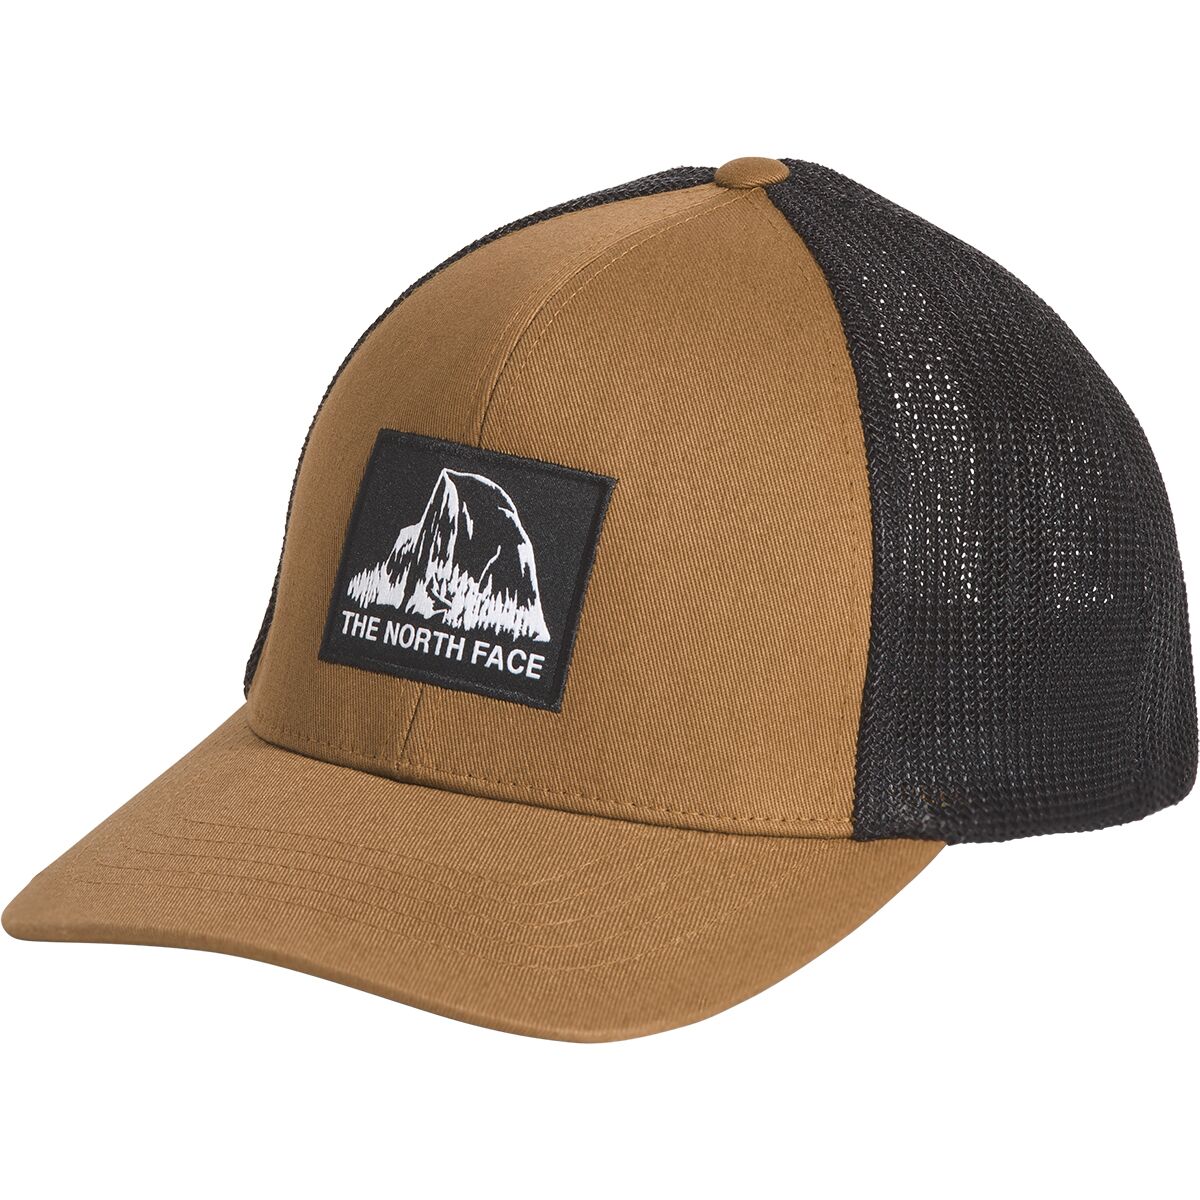 The North Face Truckee Trucker Hat -